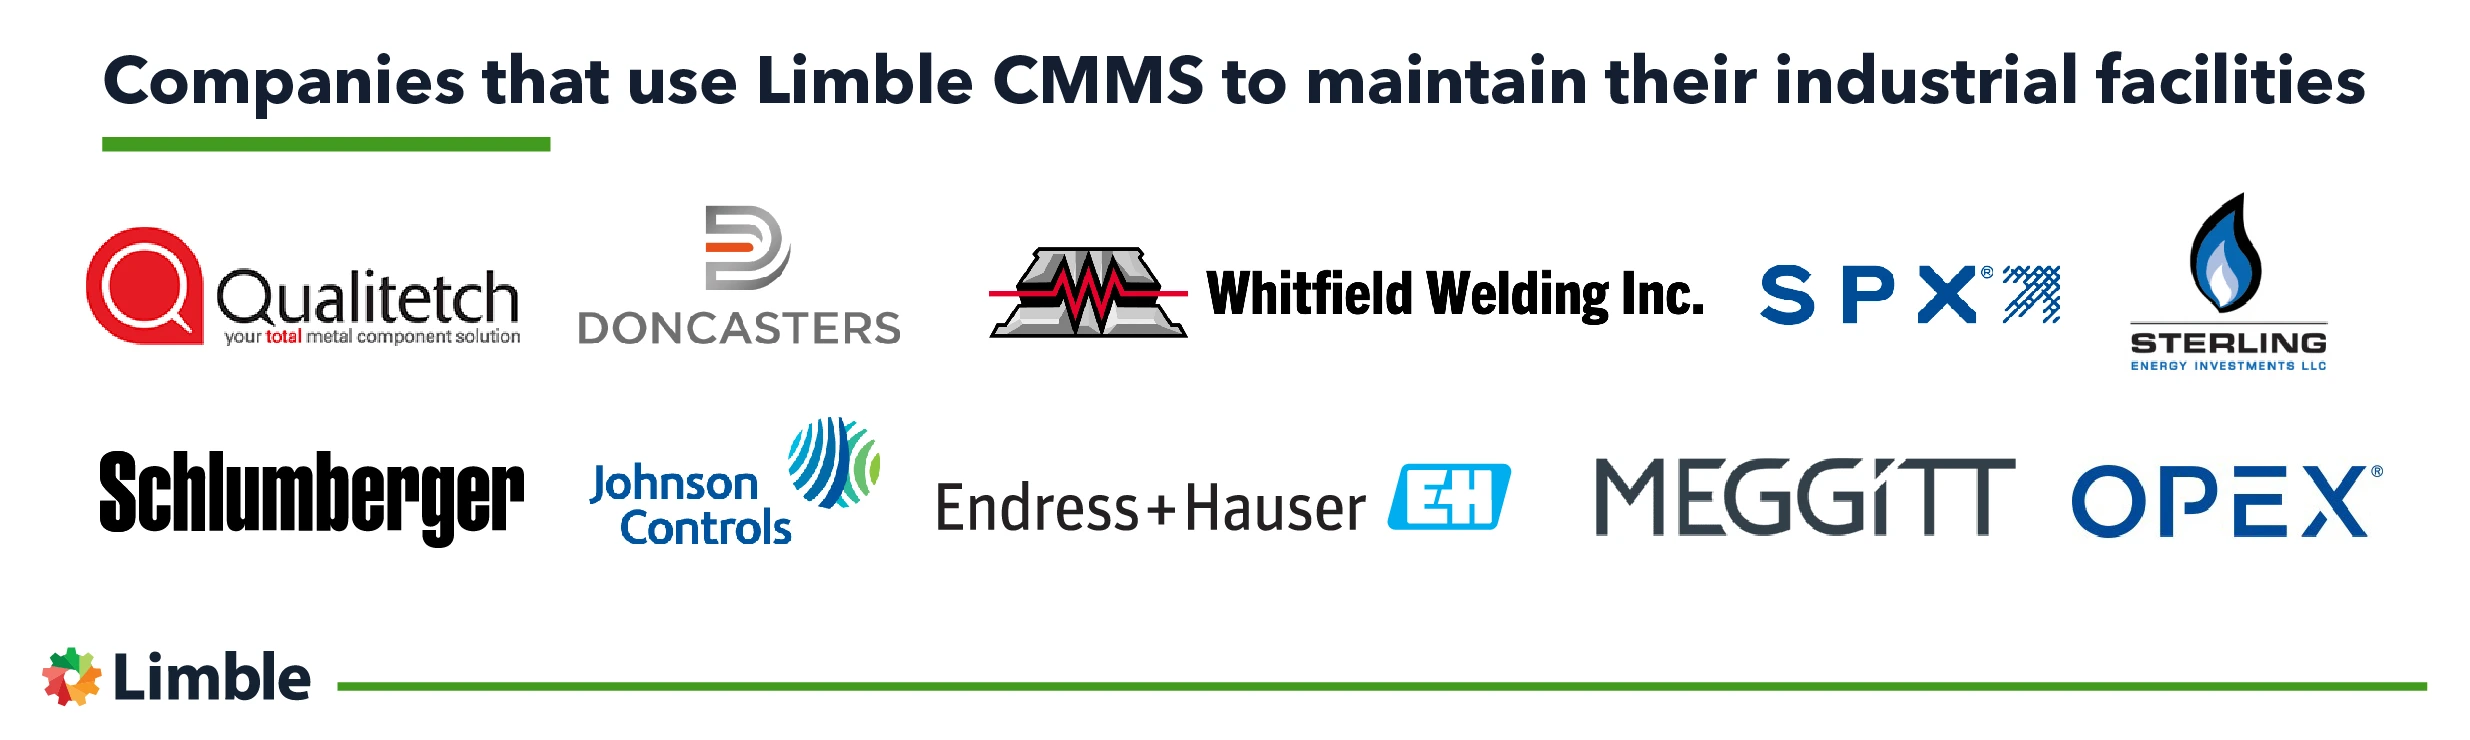 Companies that use Limble CMMS to maintain their industrial facilities